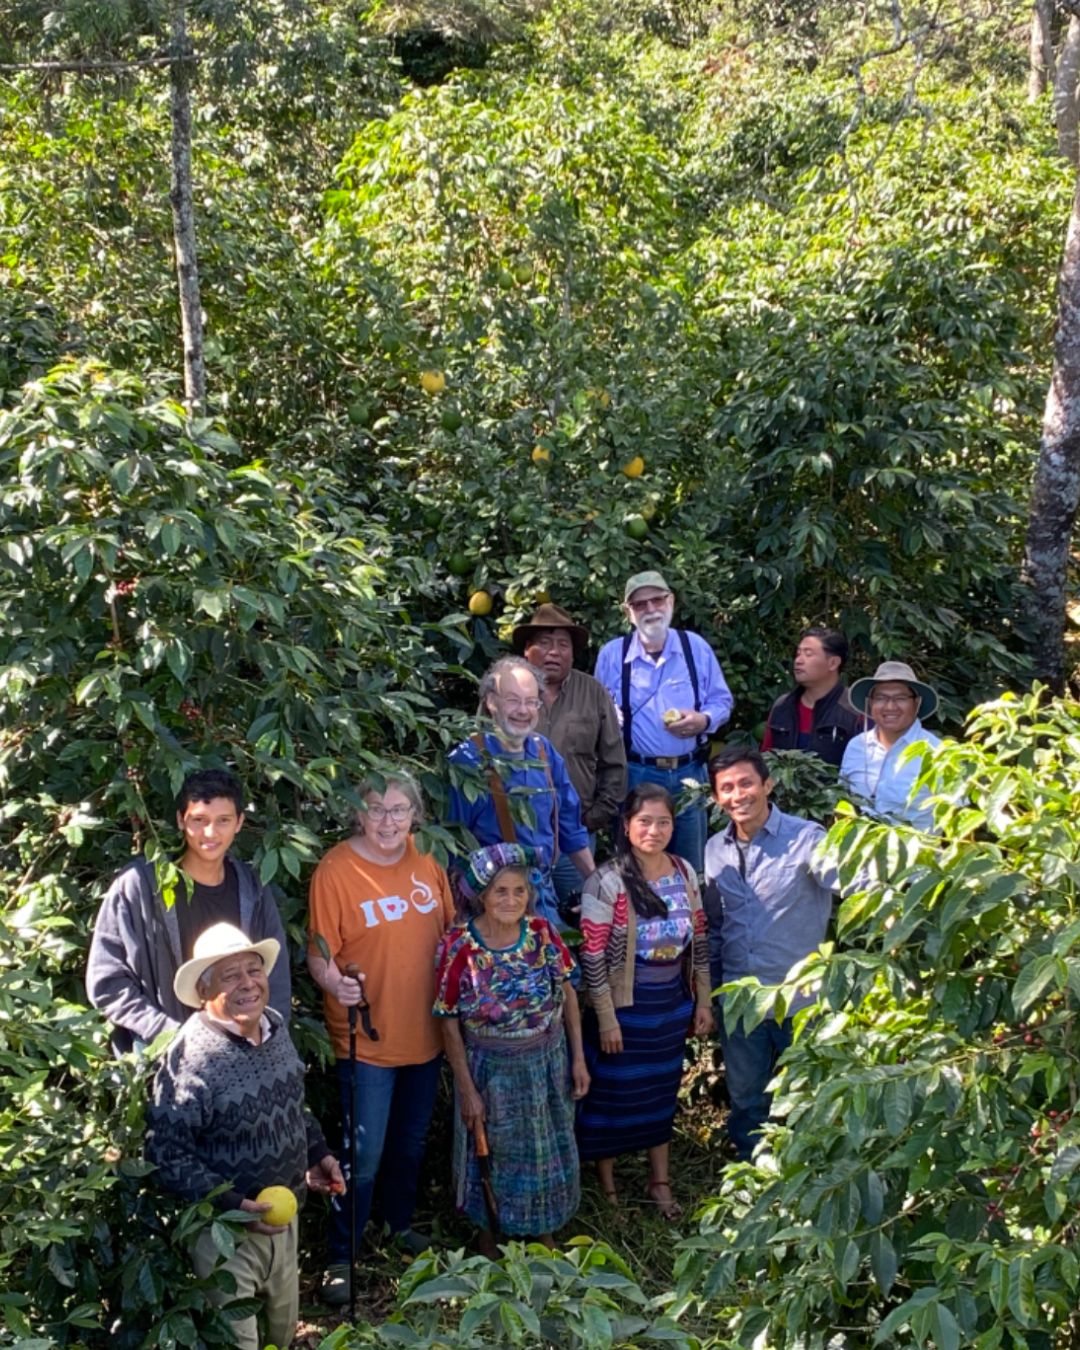 Pegasus coffee master roaster stands in the midst of coffee trees with coffee farmers